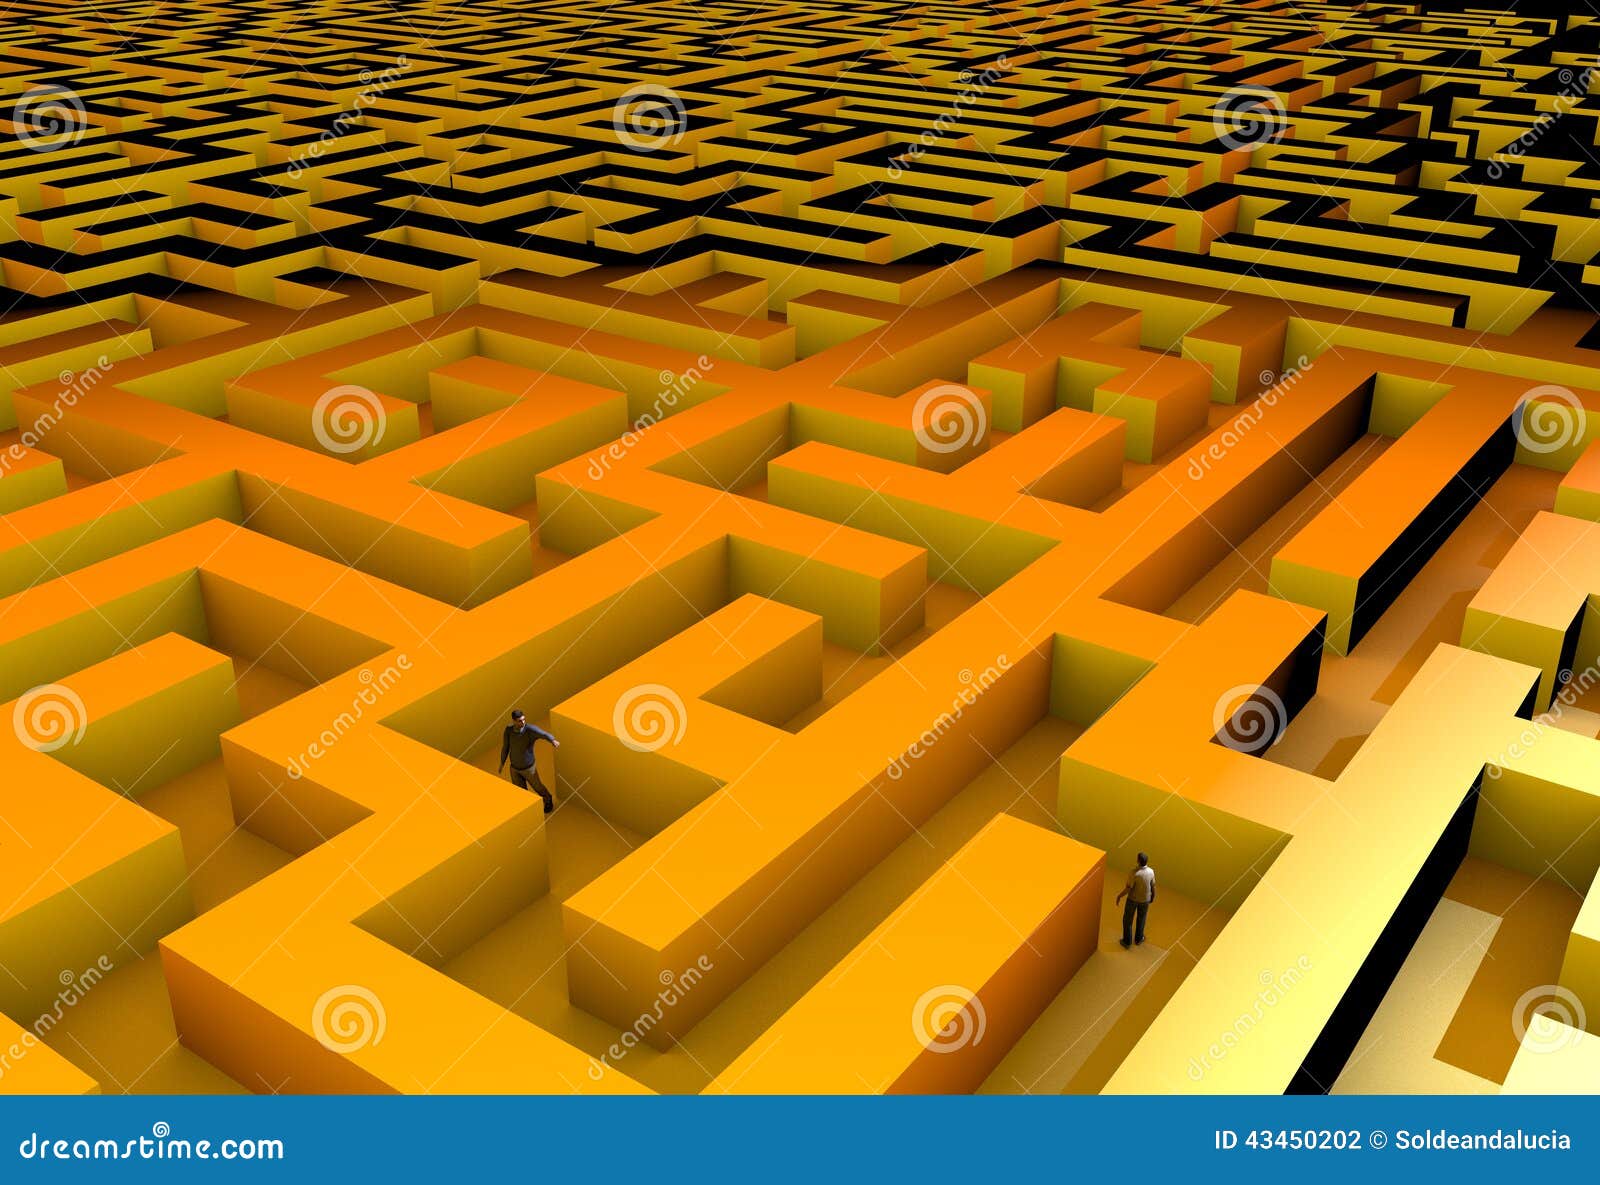 Illustration of a labyrinth made in 3D